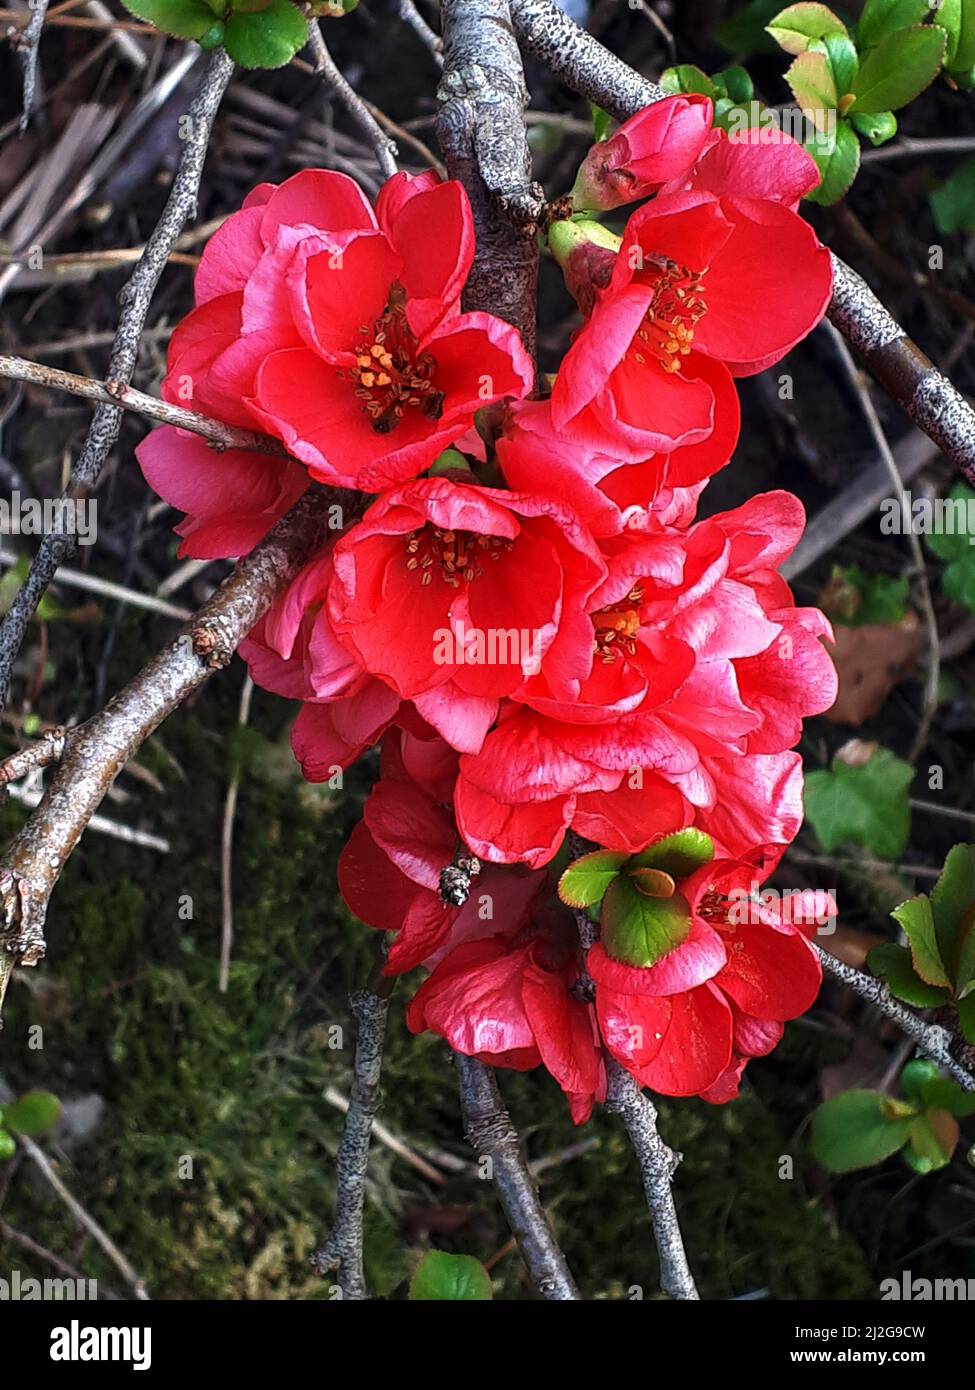 One of the early flowers of Spring in Northern England. This is the blossom of Japanese Chaenomeles Quince whose fruit makes delicious Jam. Stock Photo